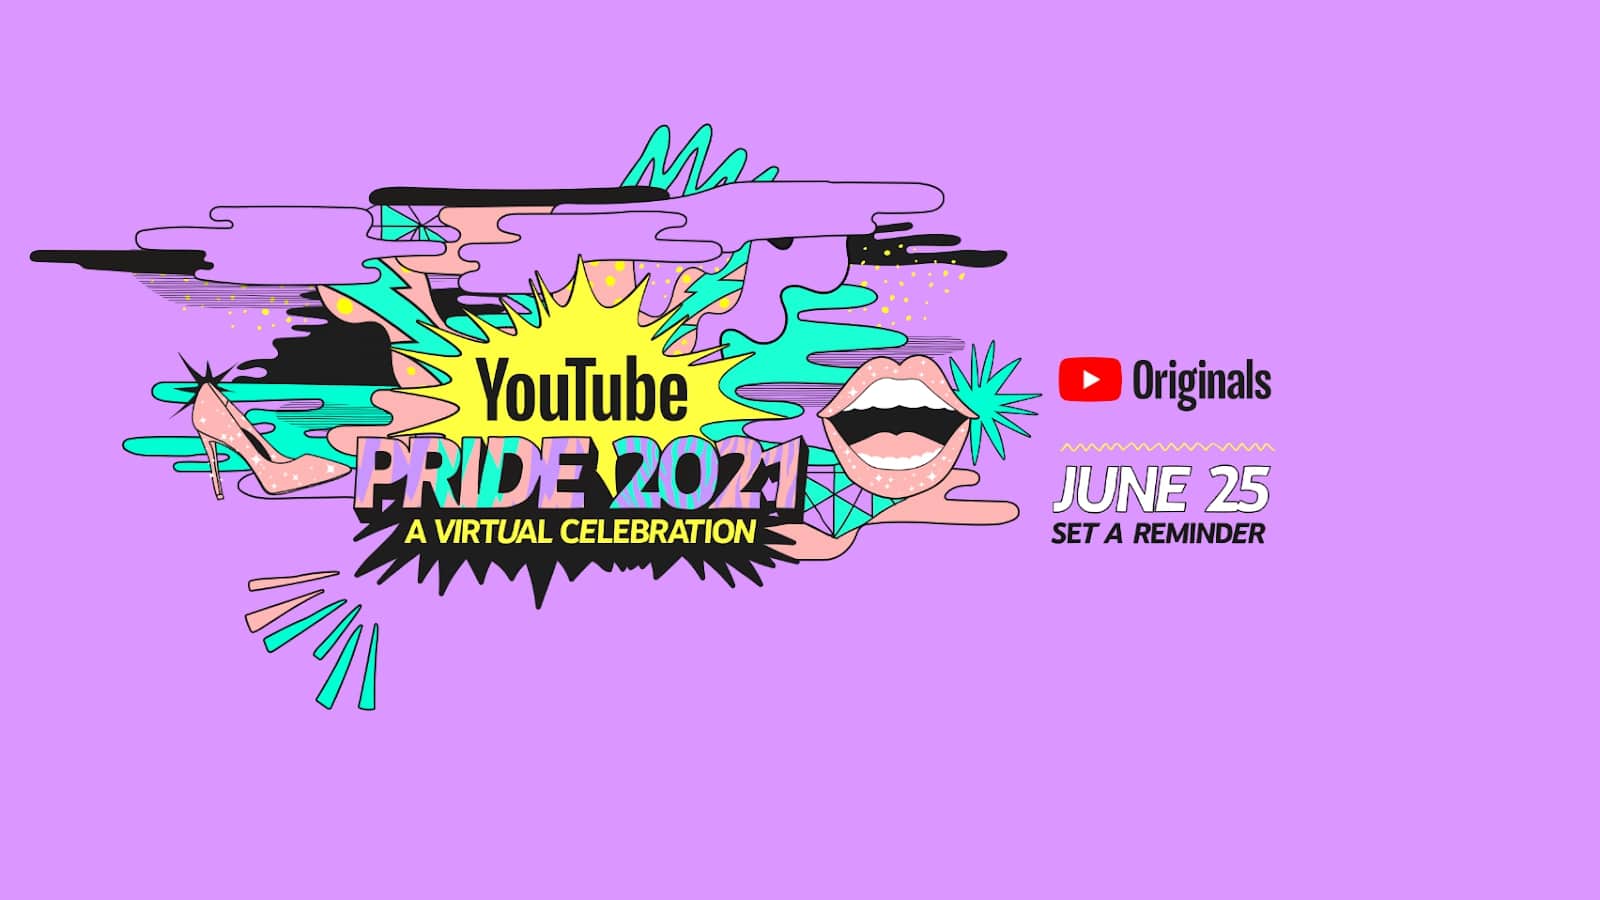 YouTube Pride 2021 Adds New Additions